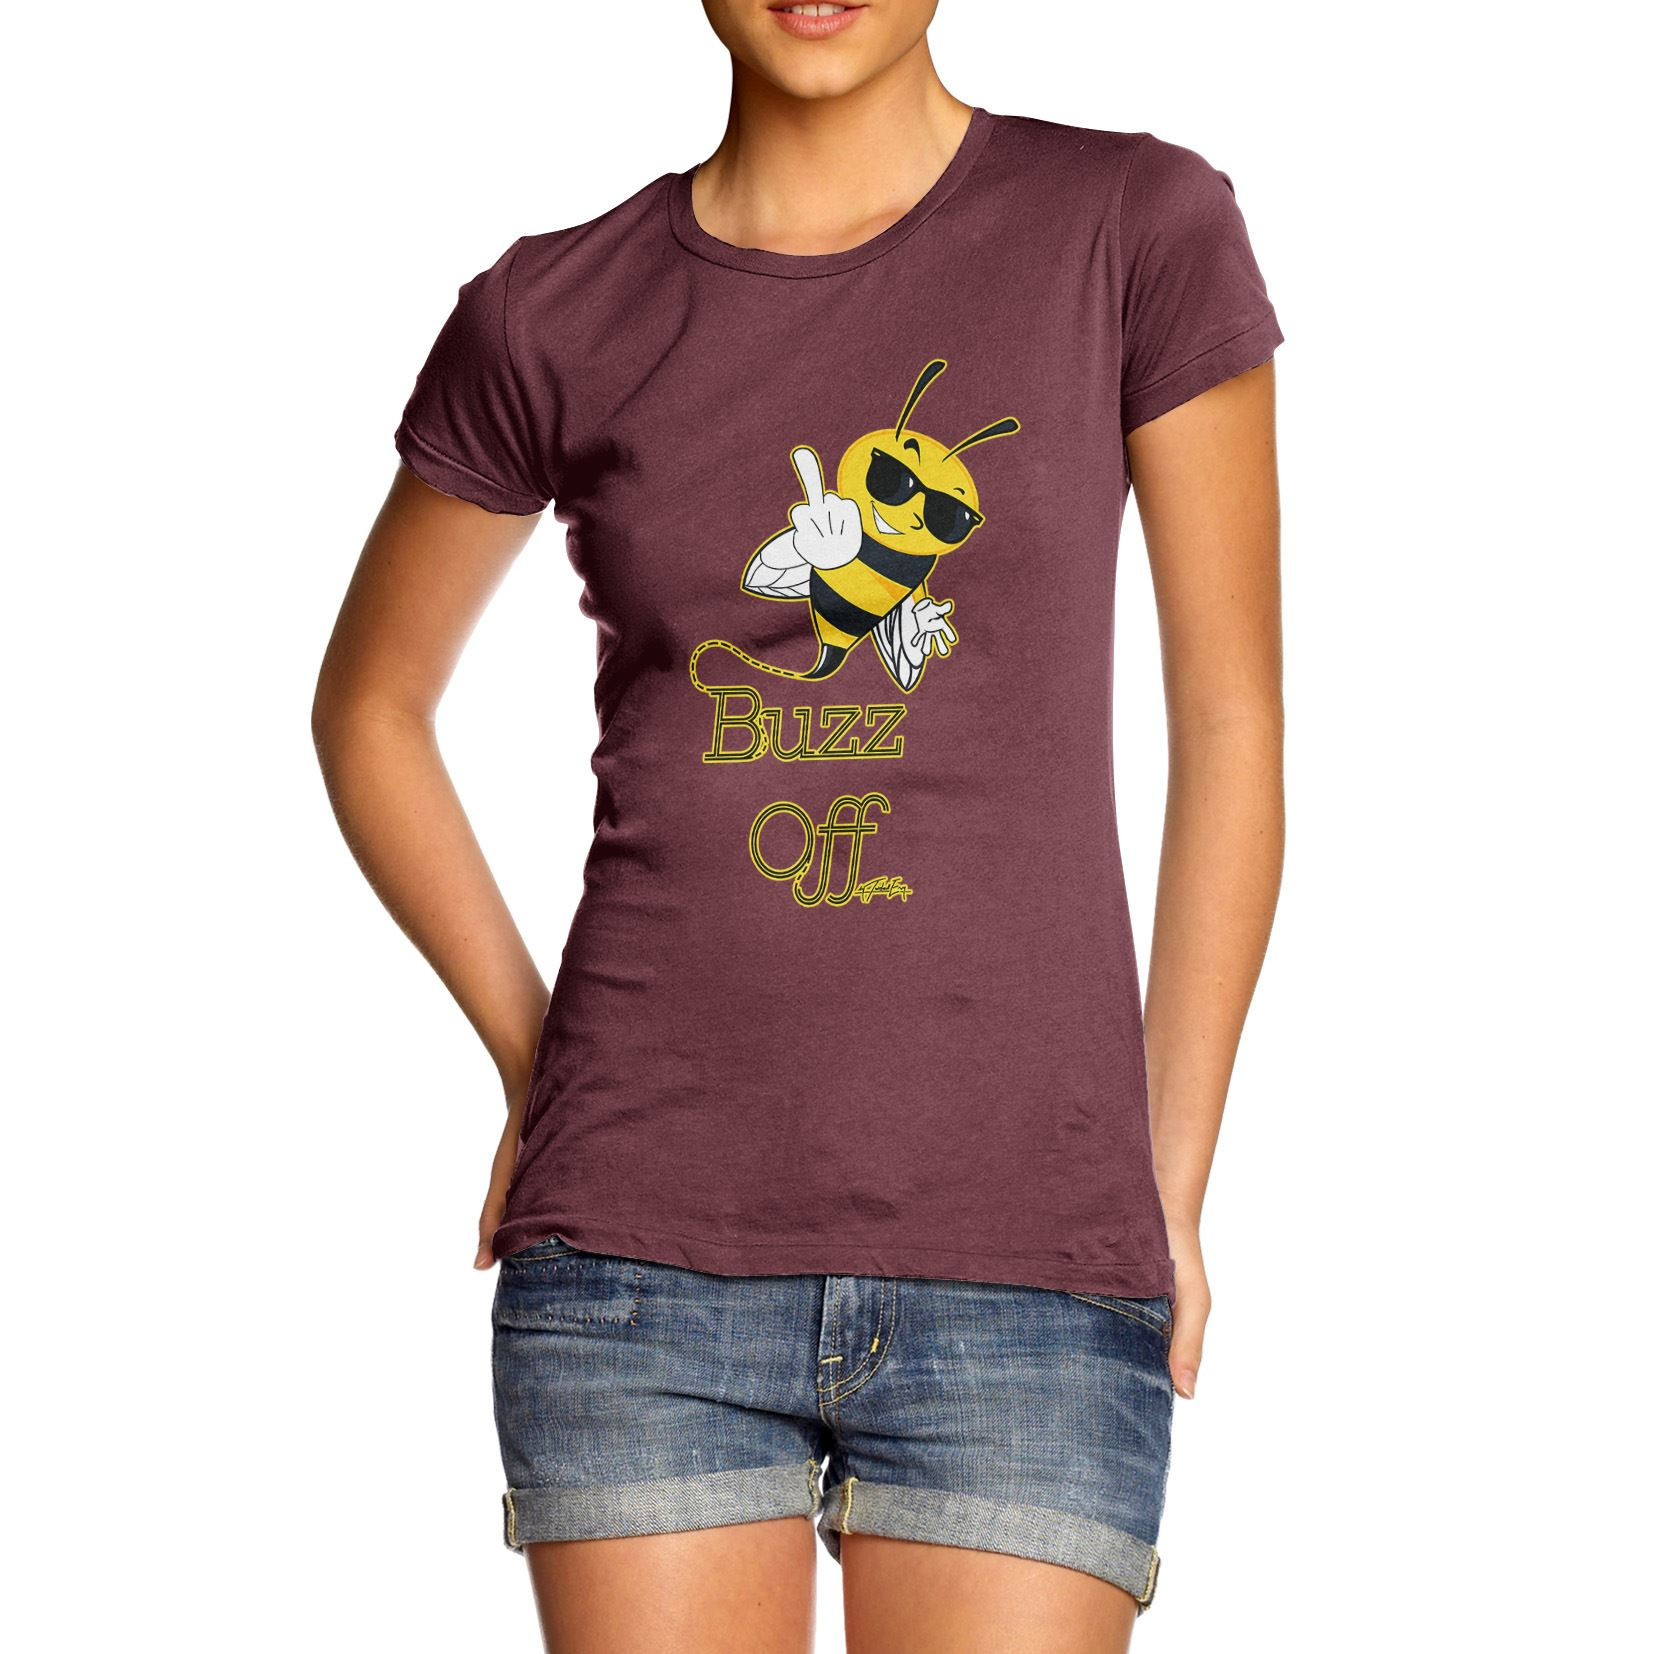 Women'S Buzzed Haircuts
 Twisted Envy Women s Passive Aggressive Bee Buzz f T